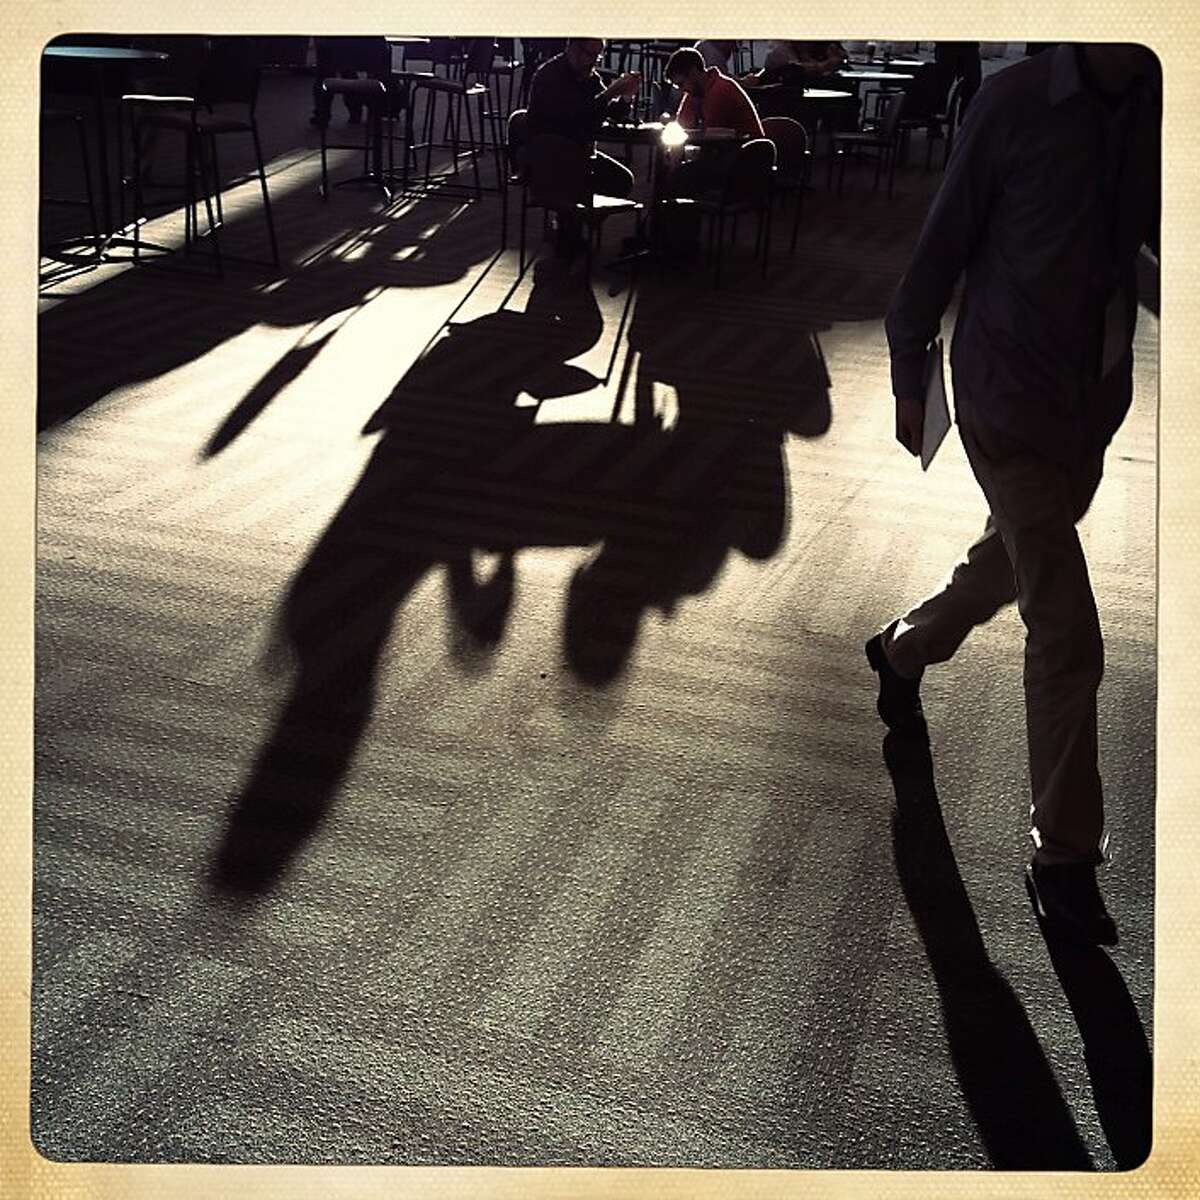 The shadows of Brad Johnson (l to r) and Issac Johnson, both of Burnsville, Minnesota, are cast across the second floor of Moscone Center West in the morning during Macworld/iWorld as the father and son work at a table on Thursday, January 31, 2013 in San Francisco, Calif.